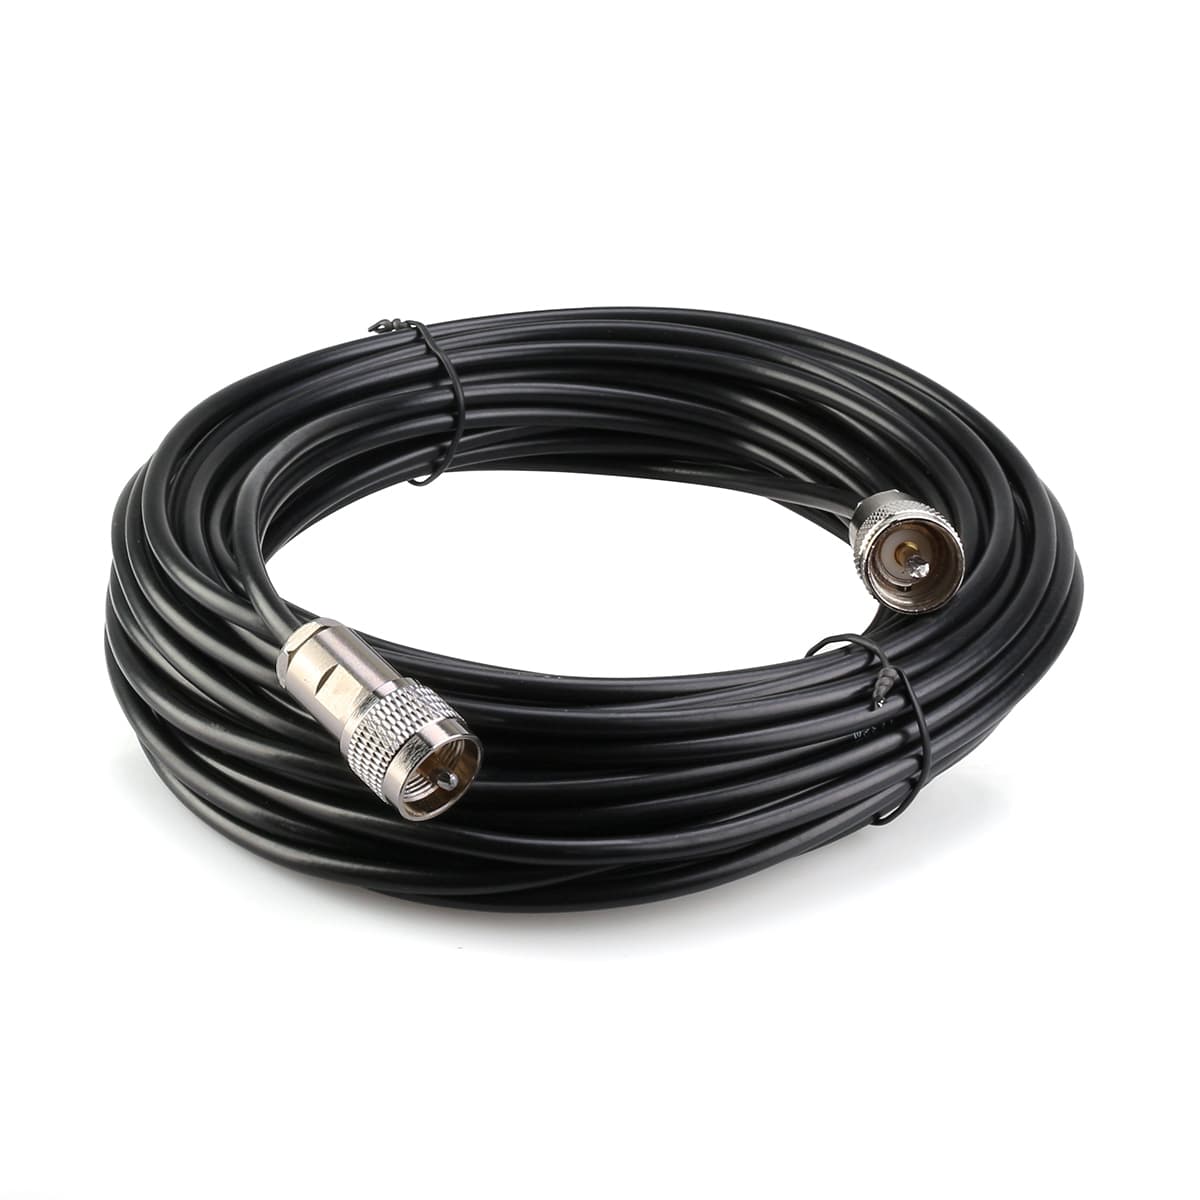 15 Meter Coaxial Cable for Mobile Radio